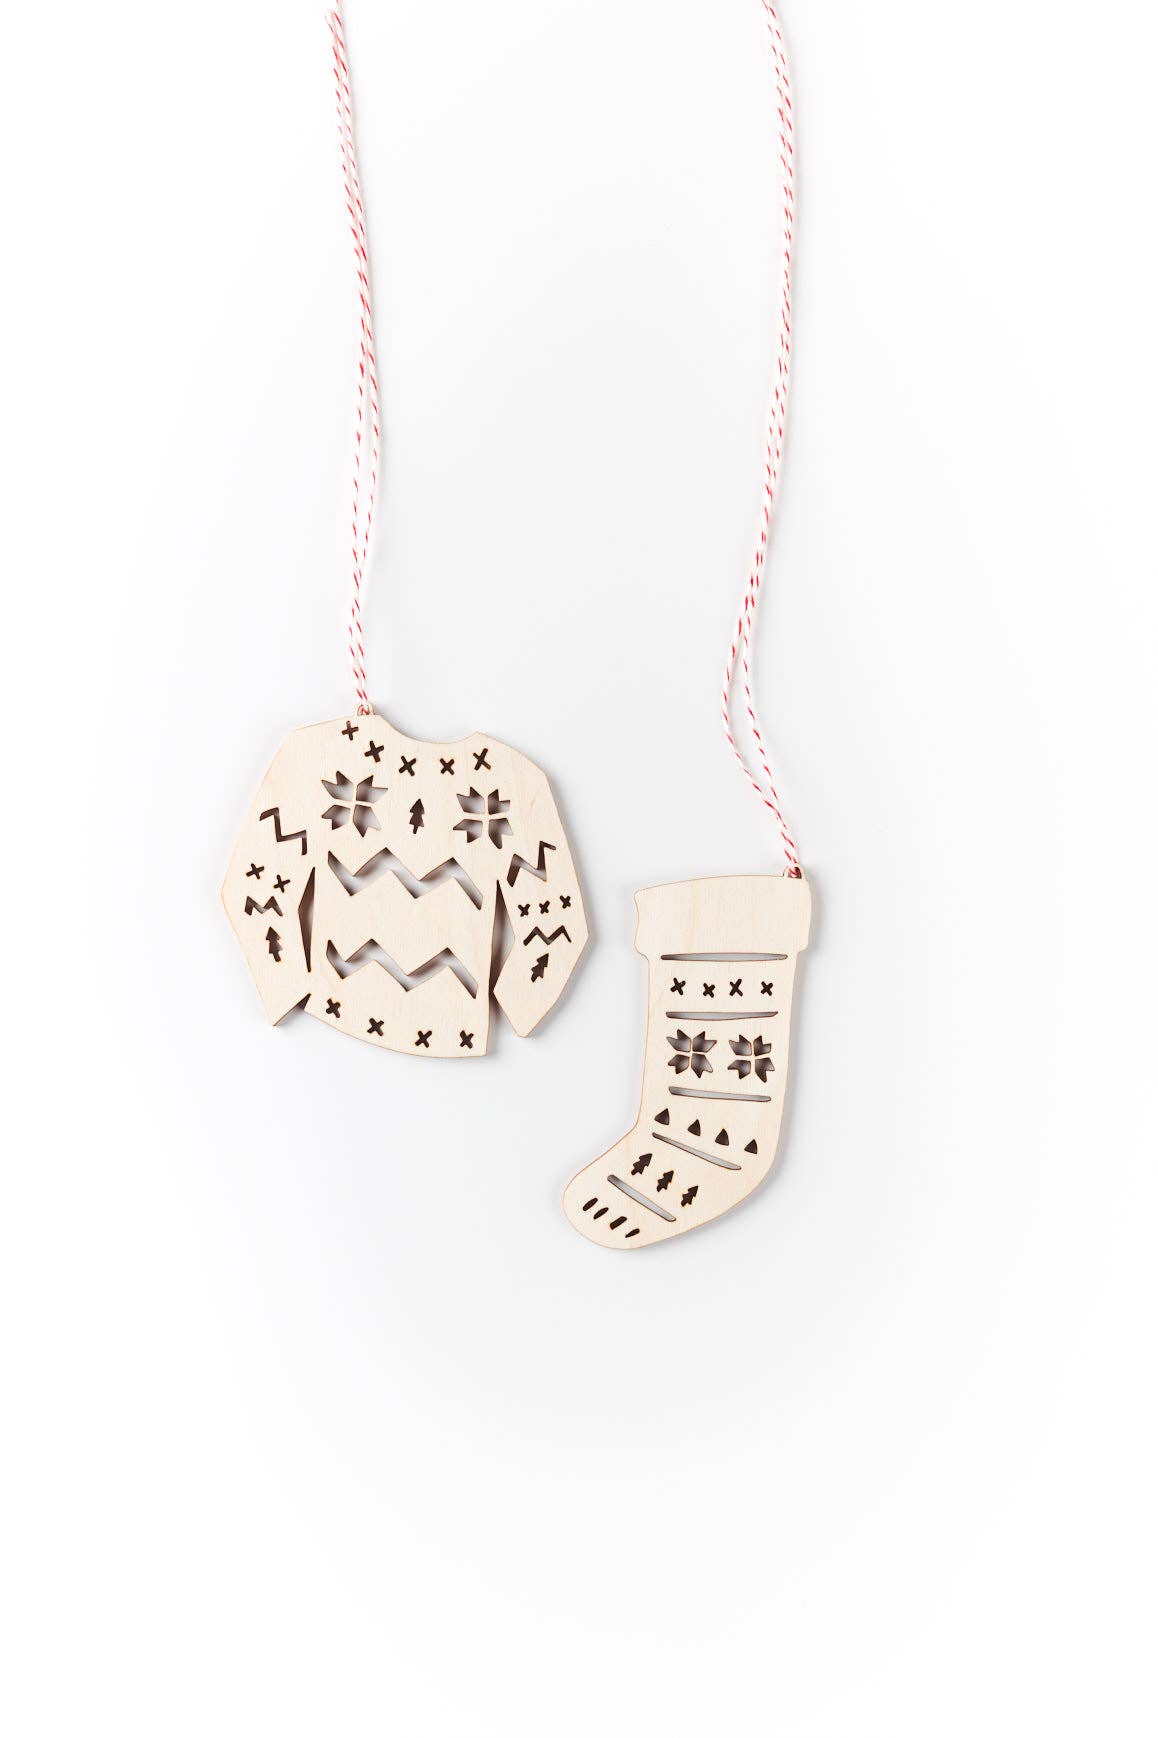 Sweater and Stocking Wooden Ornaments